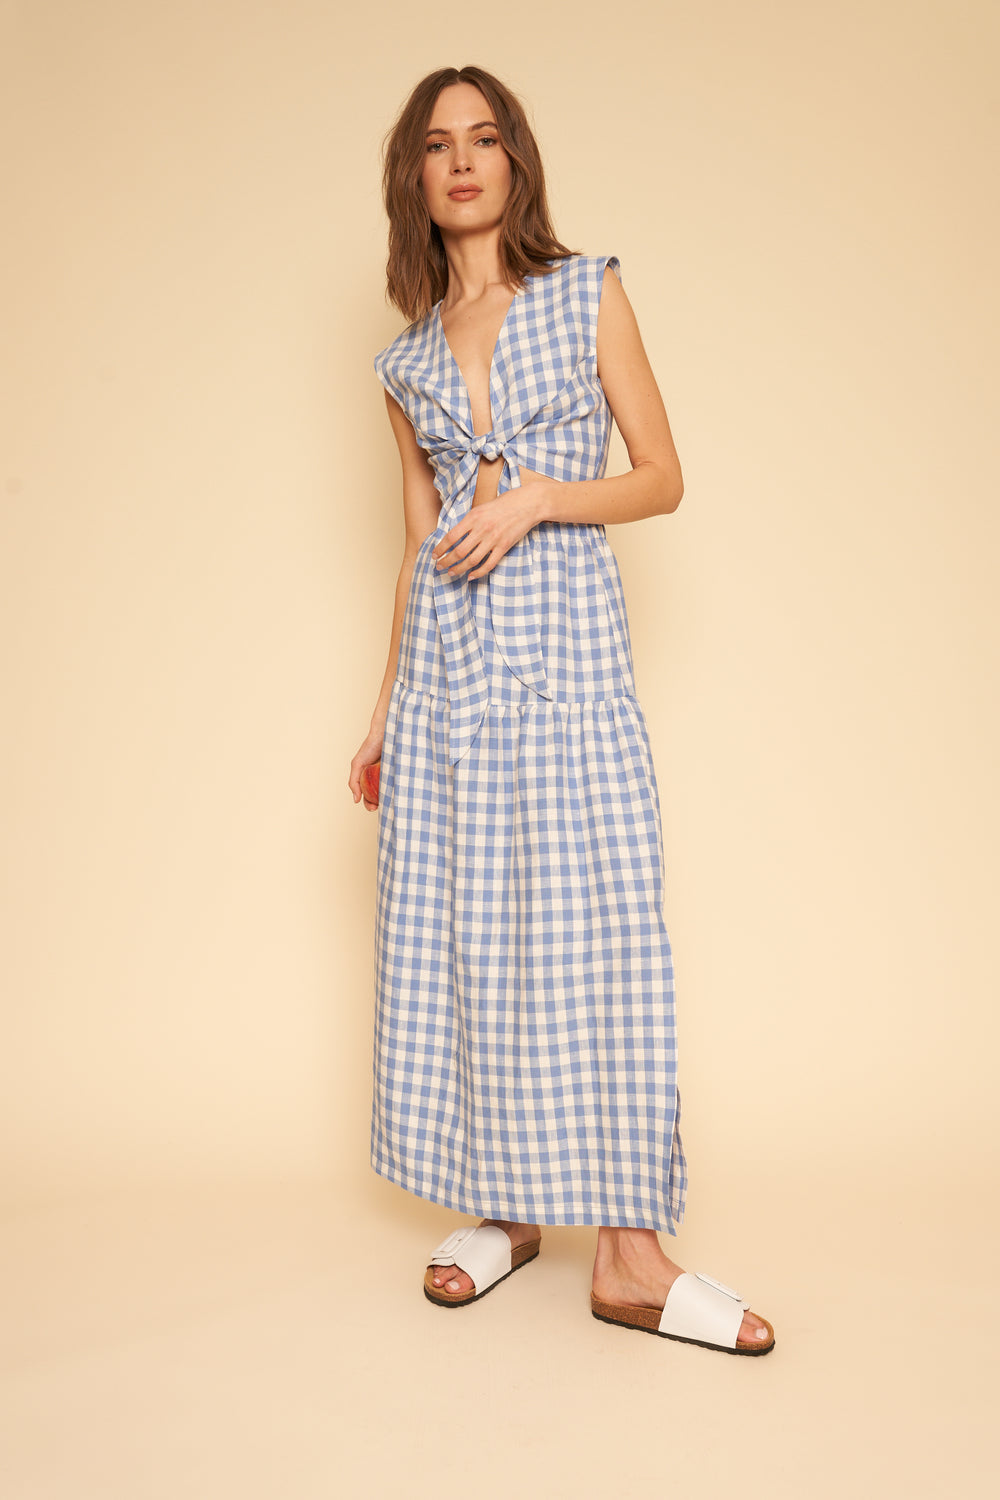 Valentina Top in Blue Gingham - Whimsy & Row